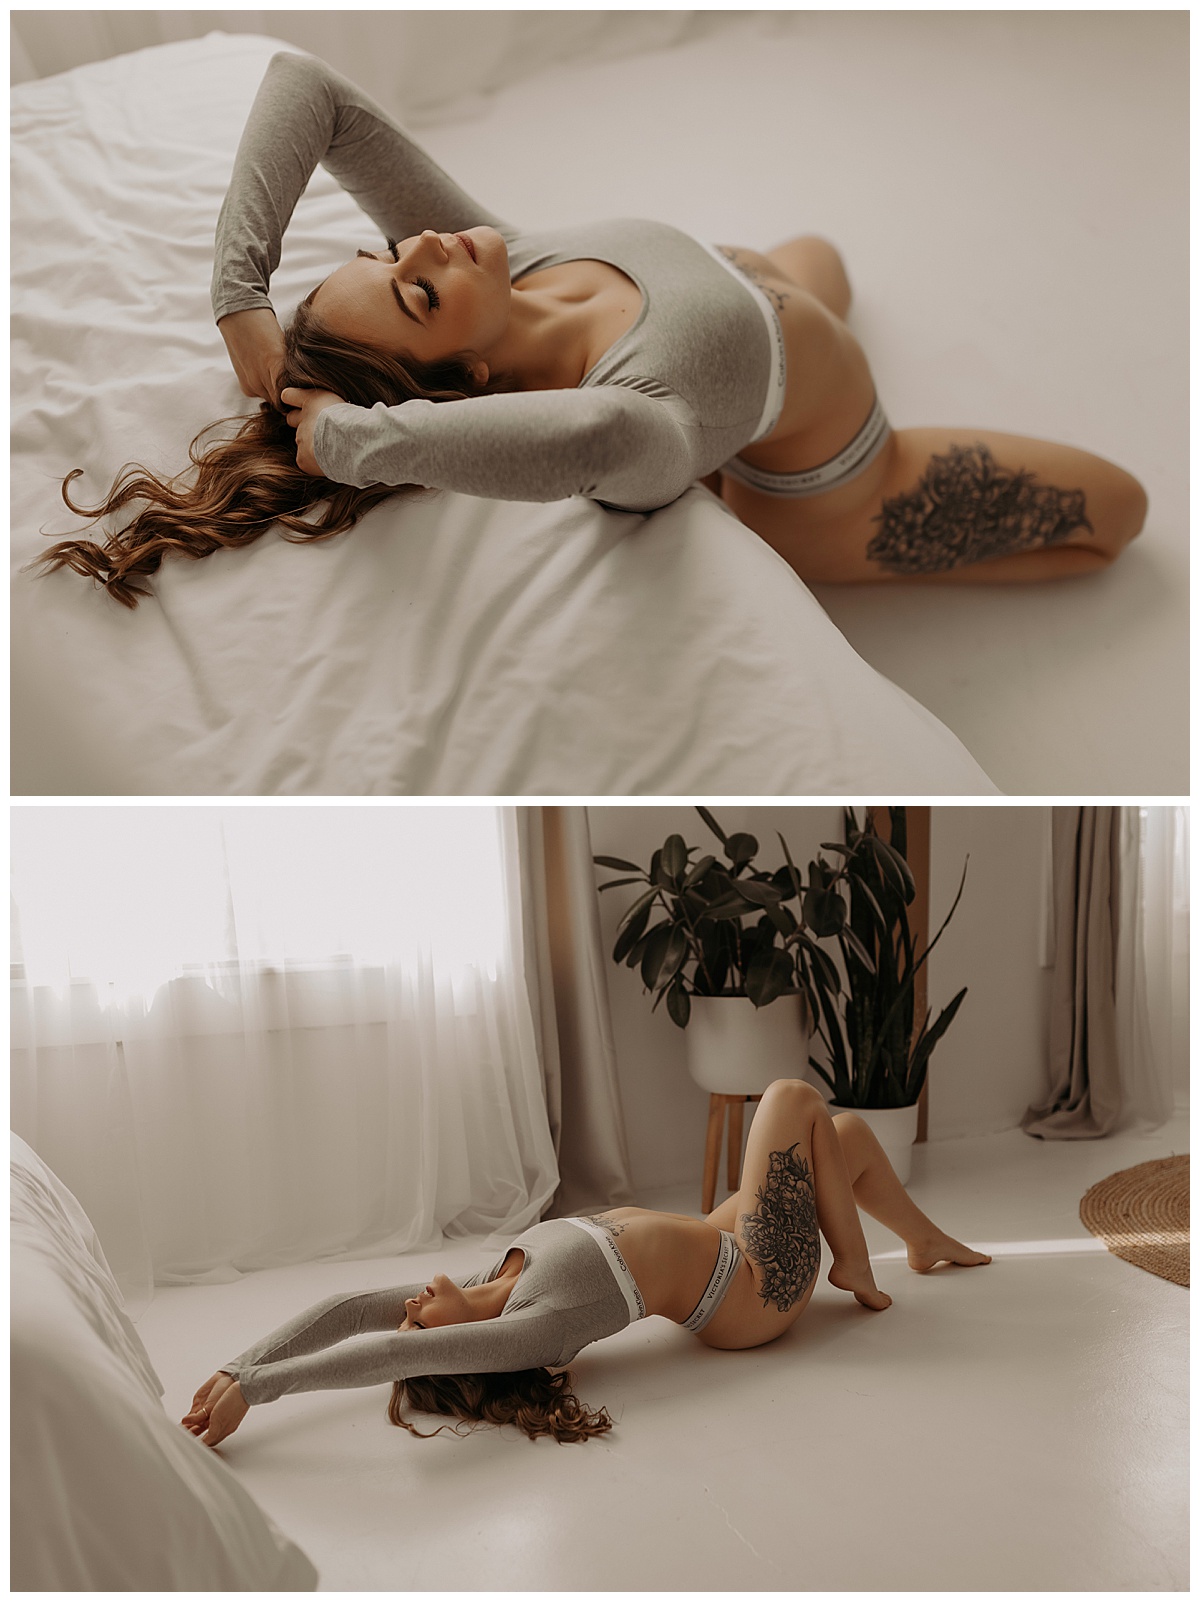 Adult lays on the floor wearing Long-Sleeve Lingerie